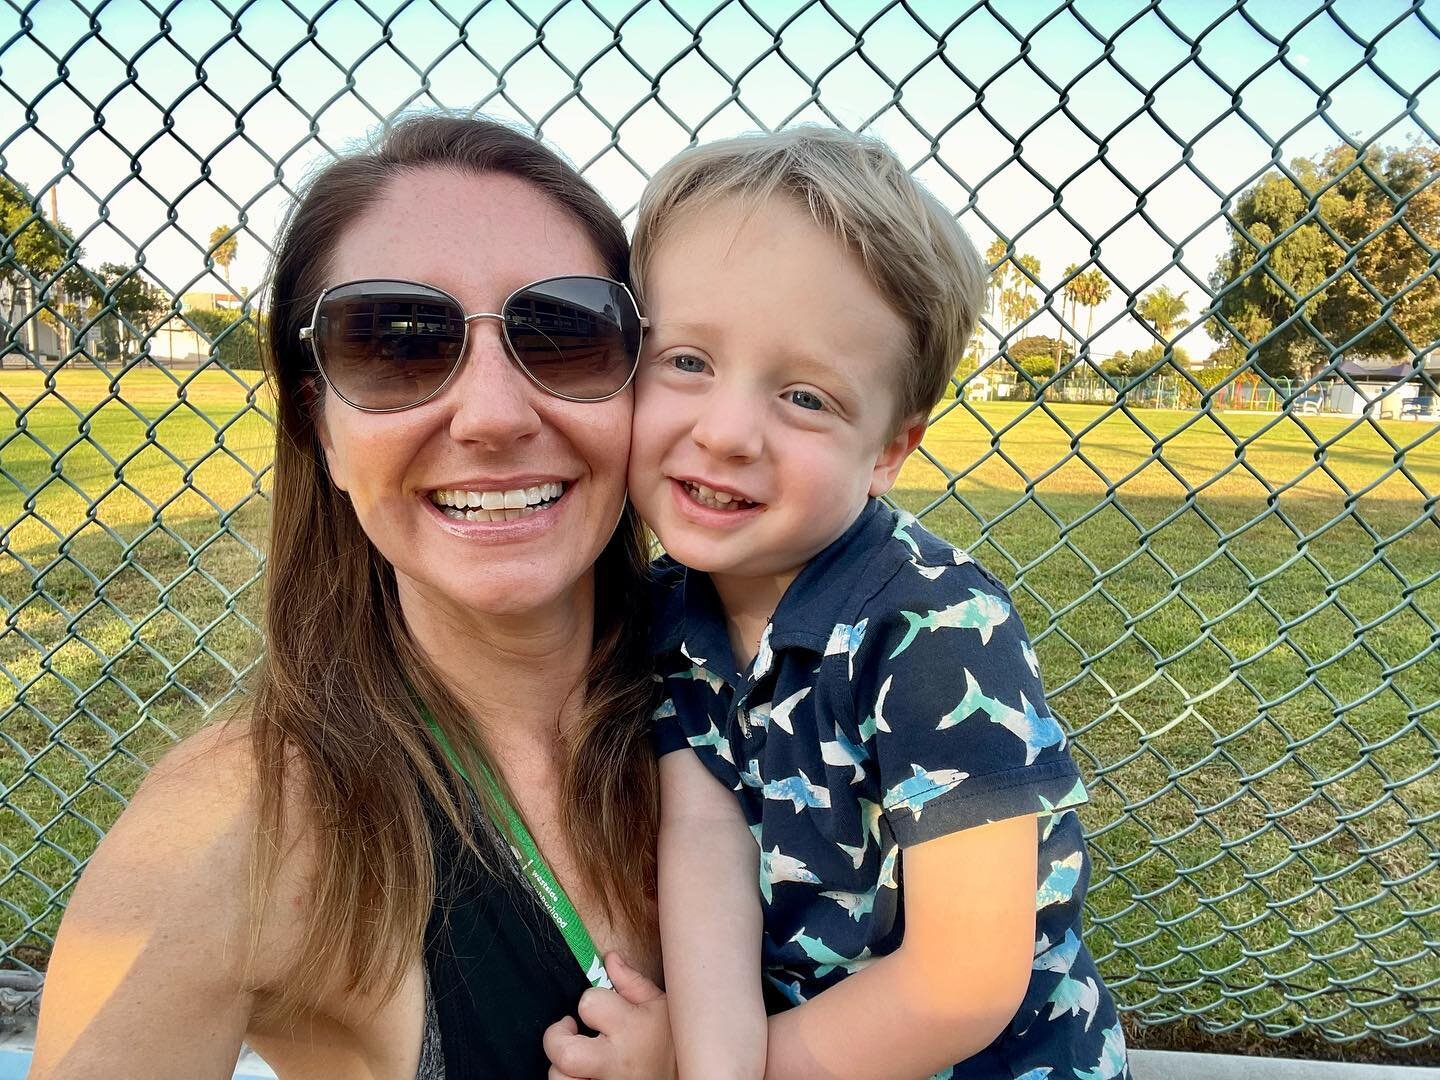 Happy National Sons Day to my little guy! He is just the best 💙💚💛

#nationalsonday #nationalsonsday #happynationalsonsday #happynationalsonday #boymom #boymomlife #motherson #mothersonlove #mothersonbond #mommysboy #mamasboy #momson #myboy